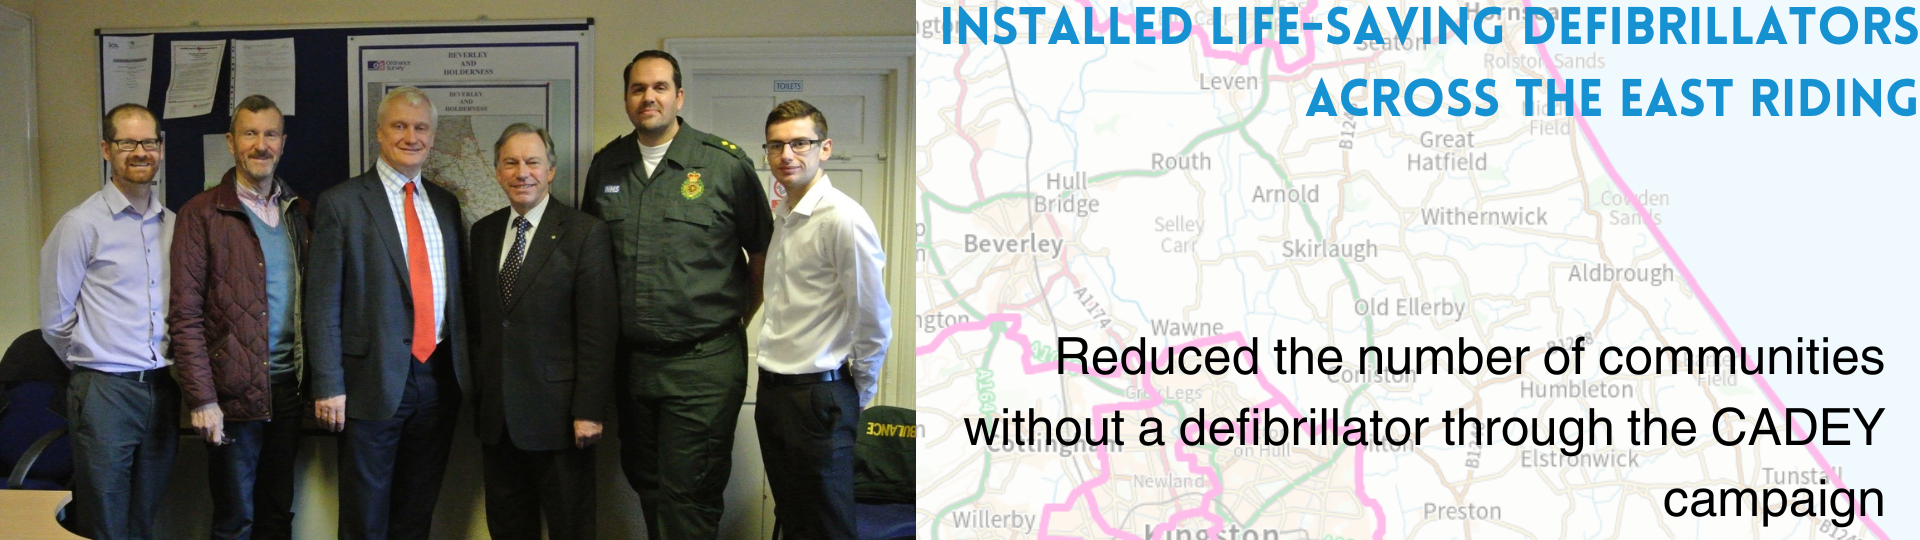 Installed life-saving defibrillators across the east riding.png